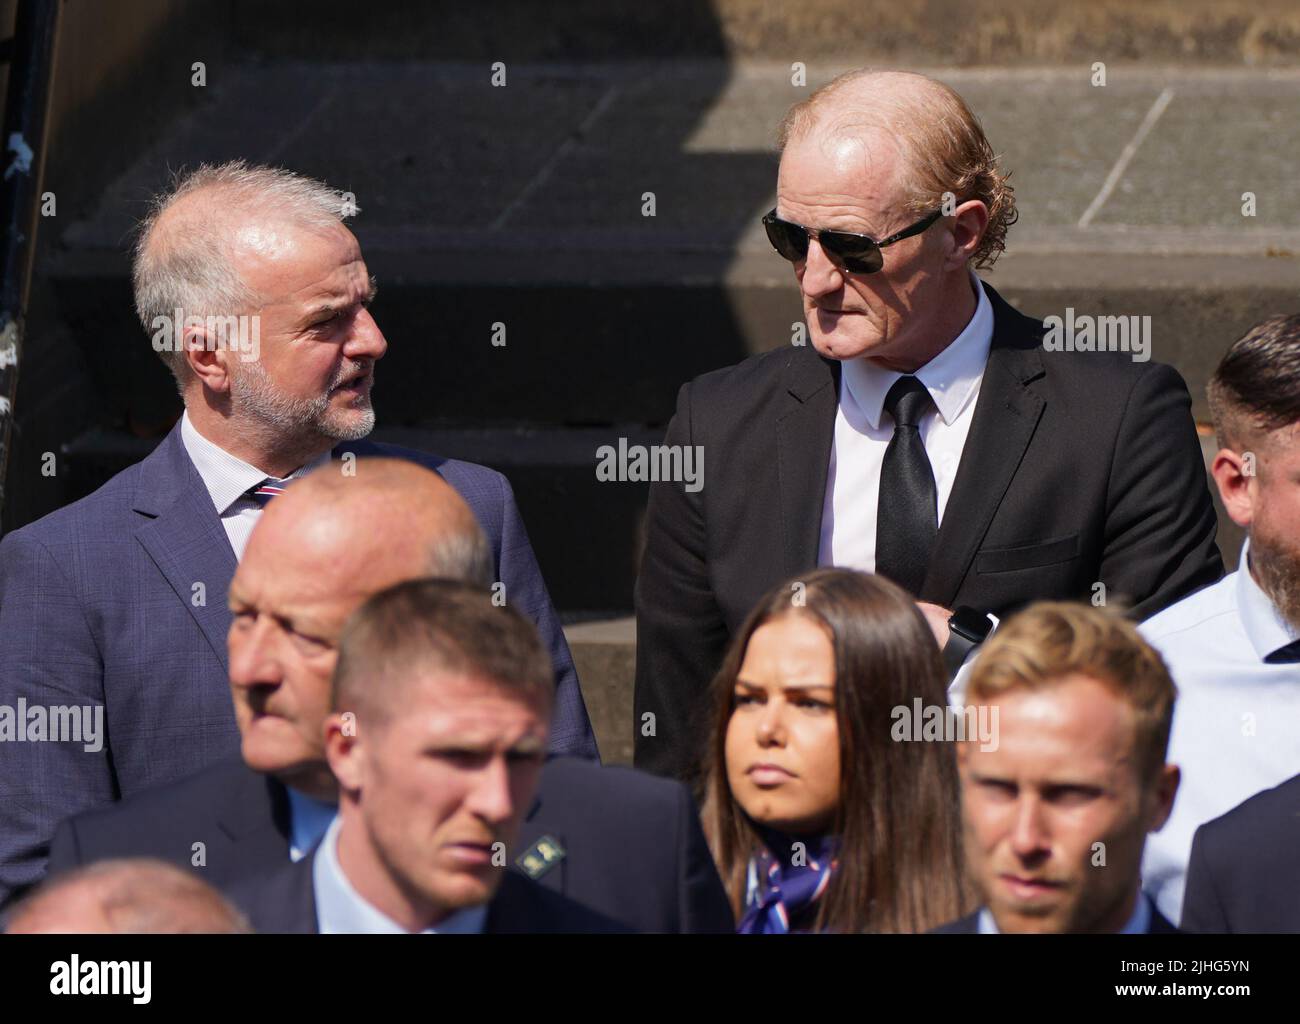 Former Rangers players Fraser Wishart (left) and Colin Hendry leave the church after of the funeral service of former Rangers goalkeeper Andy Goram, held at the Wellington Church, Glasgow. Goram who made 260 appearances for Rangers between 1991 and 1998, where he was simply known as 'The Goalie', died at the age of 58 on Saturday July 2, 2022. Picture date: Monday July 18, 2022. Stock Photo